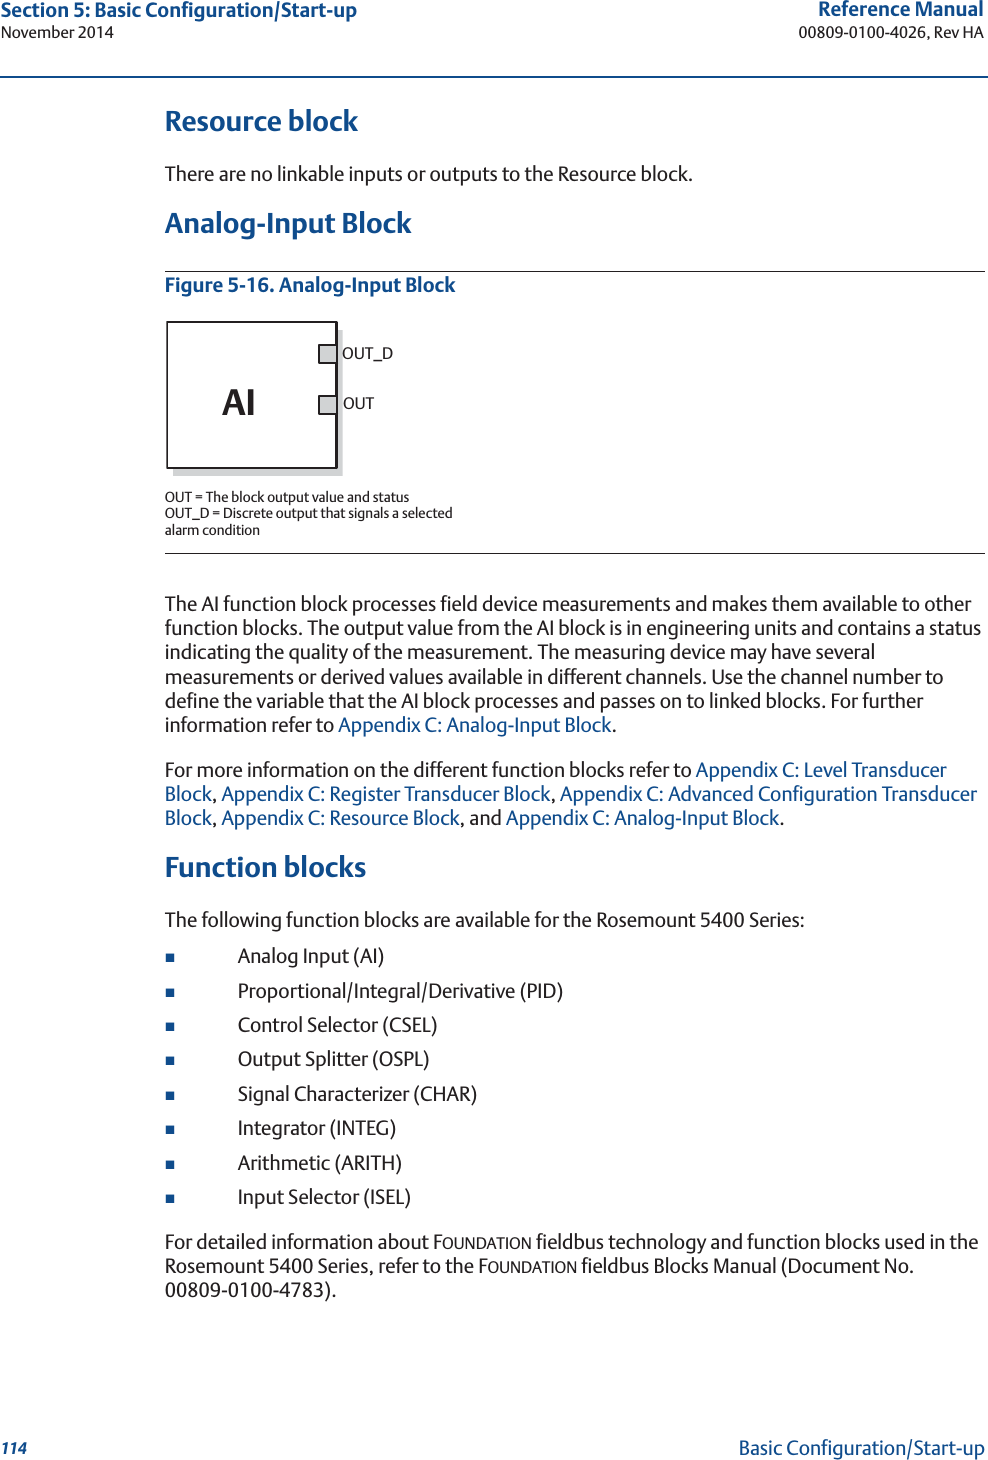 114Reference Manual00809-0100-4026, Rev HASection 5: Basic Configuration/Start-upNovember 2014Basic Configuration/Start-upResource blockThere are no linkable inputs or outputs to the Resource block.Analog-Input BlockFigure 5-16. Analog-Input BlockThe AI function block processes field device measurements and makes them available to other function blocks. The output value from the AI block is in engineering units and contains a status indicating the quality of the measurement. The measuring device may have several measurements or derived values available in different channels. Use the channel number to define the variable that the AI block processes and passes on to linked blocks. For further information refer to Appendix C: Analog-Input Block.For more information on the different function blocks refer to Appendix C: Level Transducer Block, Appendix C: Register Transducer Block, Appendix C: Advanced Configuration Transducer Block, Appendix C: Resource Block, and Appendix C: Analog-Input Block.Function blocksThe following function blocks are available for the Rosemount 5400 Series:Analog Input (AI)Proportional/Integral/Derivative (PID)Control Selector (CSEL)Output Splitter (OSPL)Signal Characterizer (CHAR)Integrator (INTEG)Arithmetic (ARITH)Input Selector (ISEL)For detailed information about FOUNDATION fieldbus technology and function blocks used in the Rosemount 5400 Series, refer to the FOUNDATION fieldbus Blocks Manual (Document No. 00809-0100-4783).OUT = The block output value and statusOUT_D = Discrete output that signals a selected alarm conditionOUT_DOUTAI